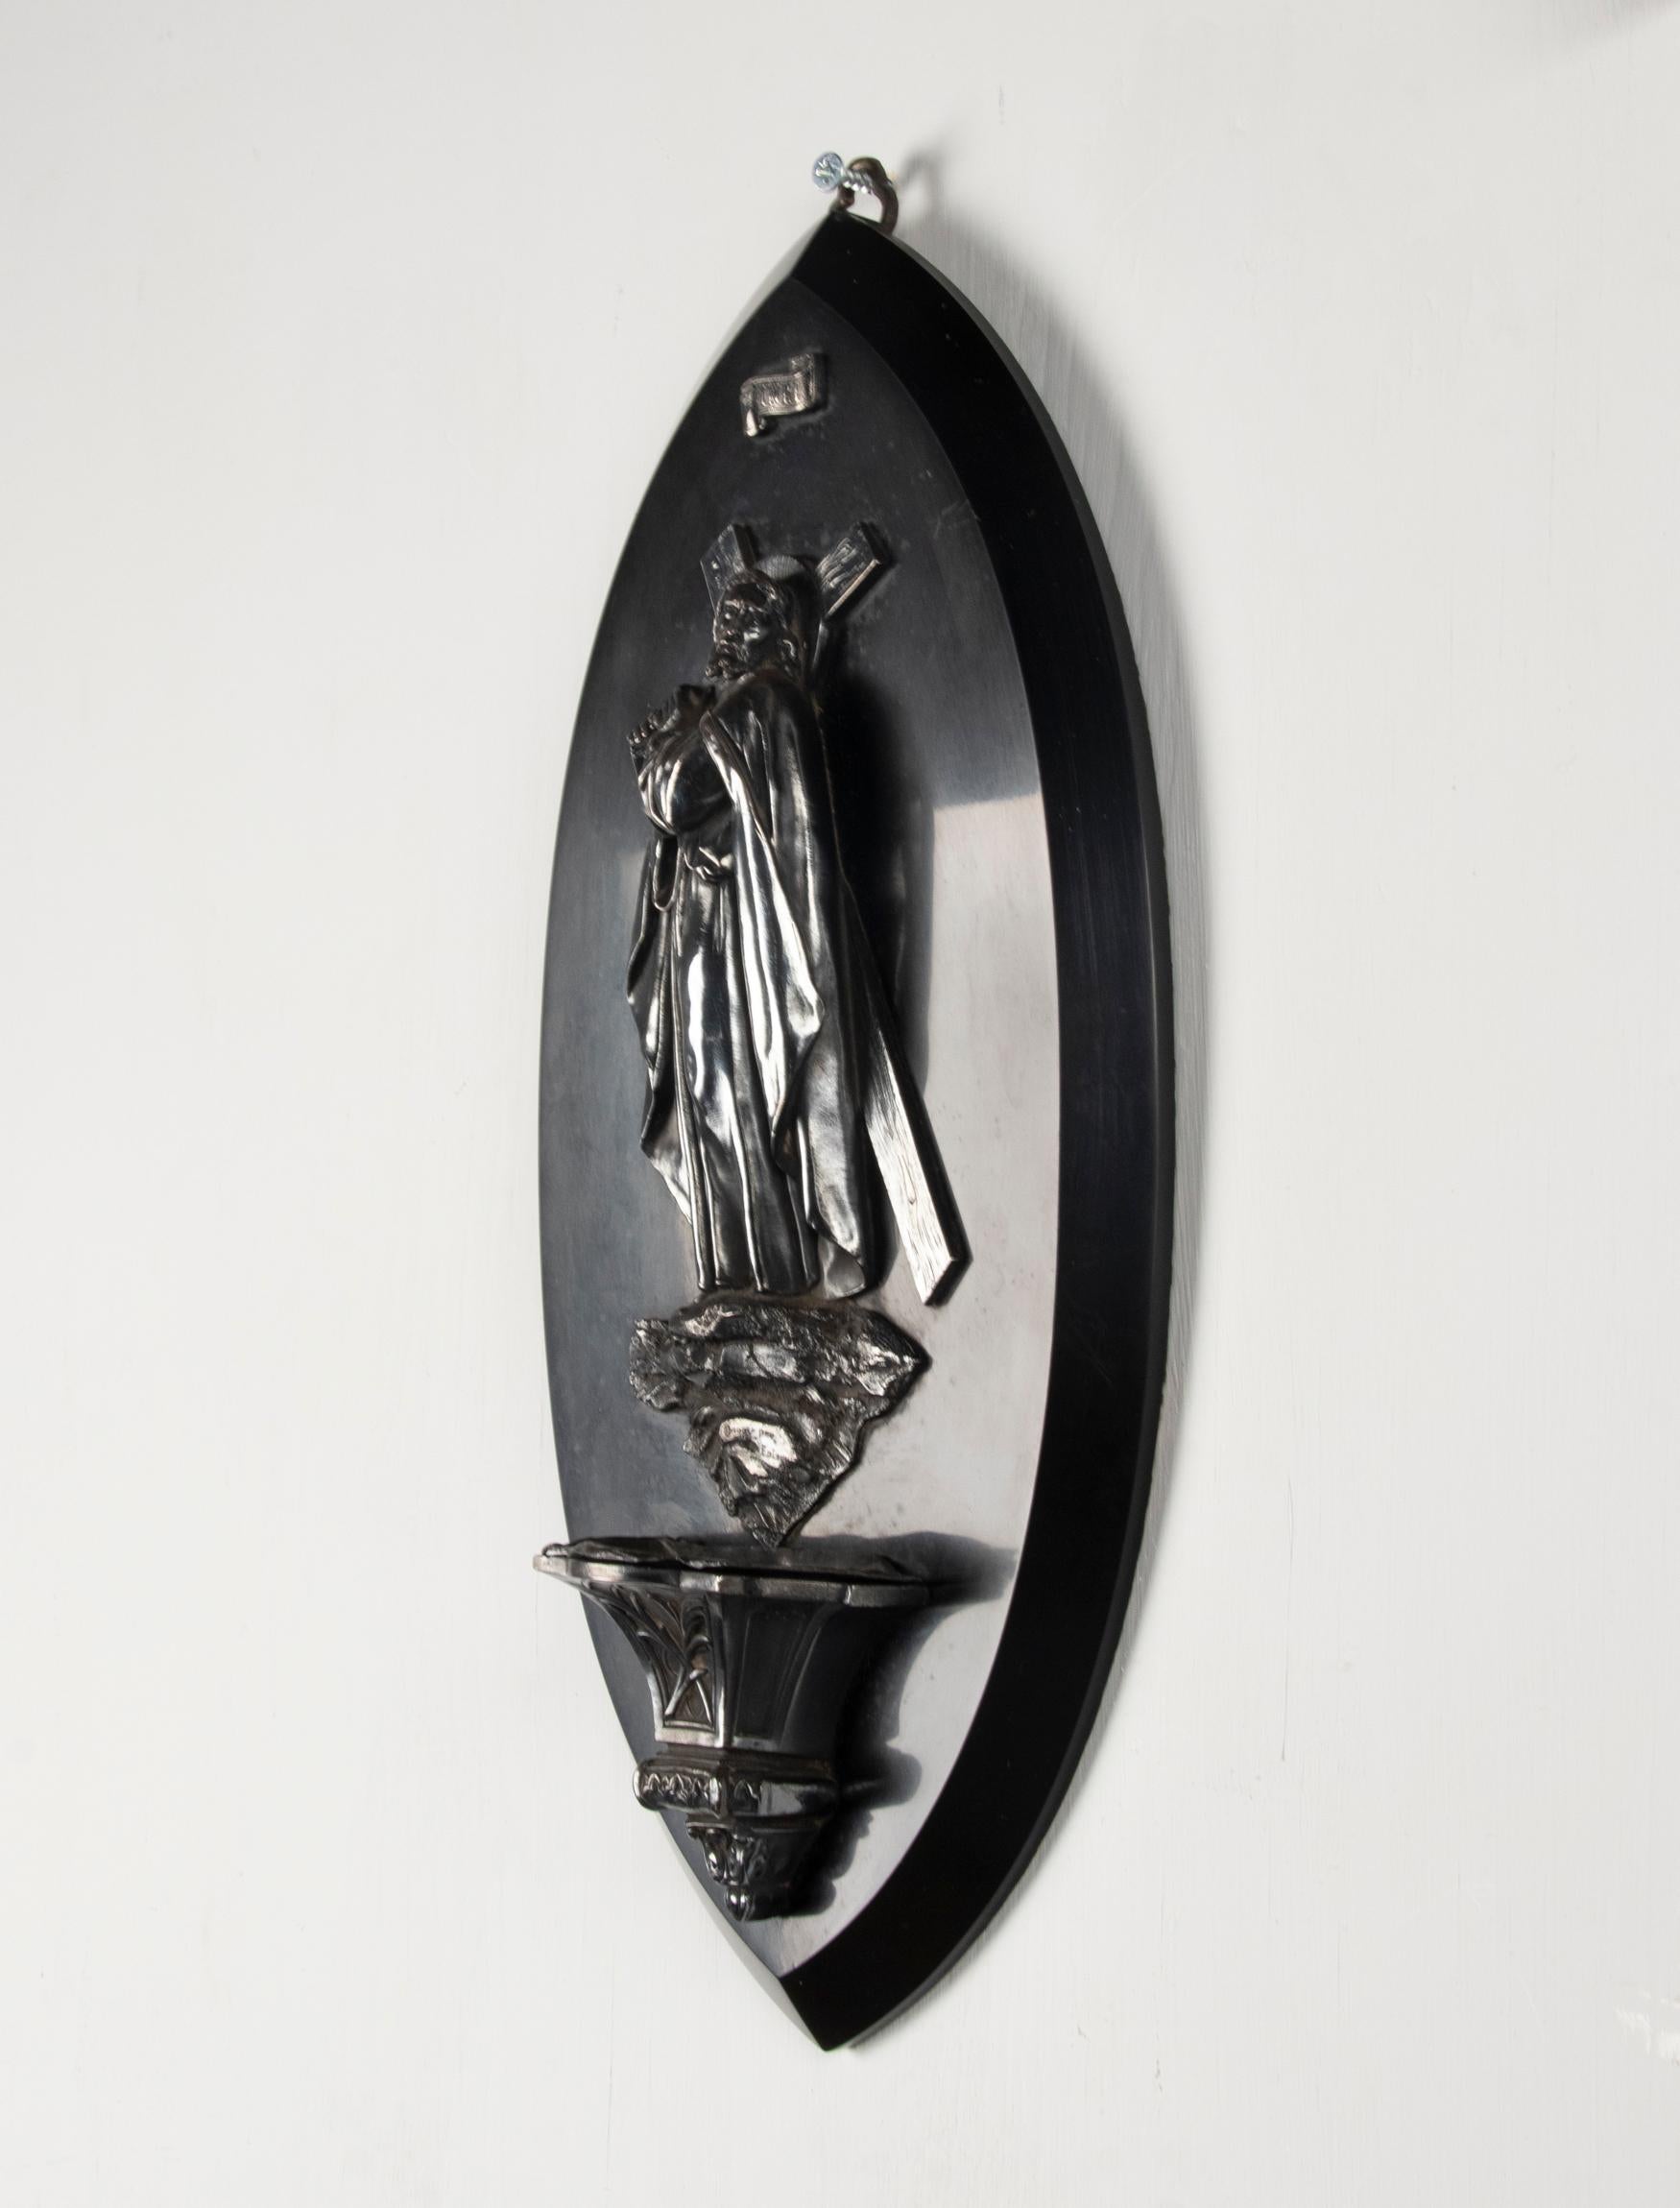 Late 19th Century 19th Century Holy Water Font Depicting Jesus Christ, Silver-Plated Brass